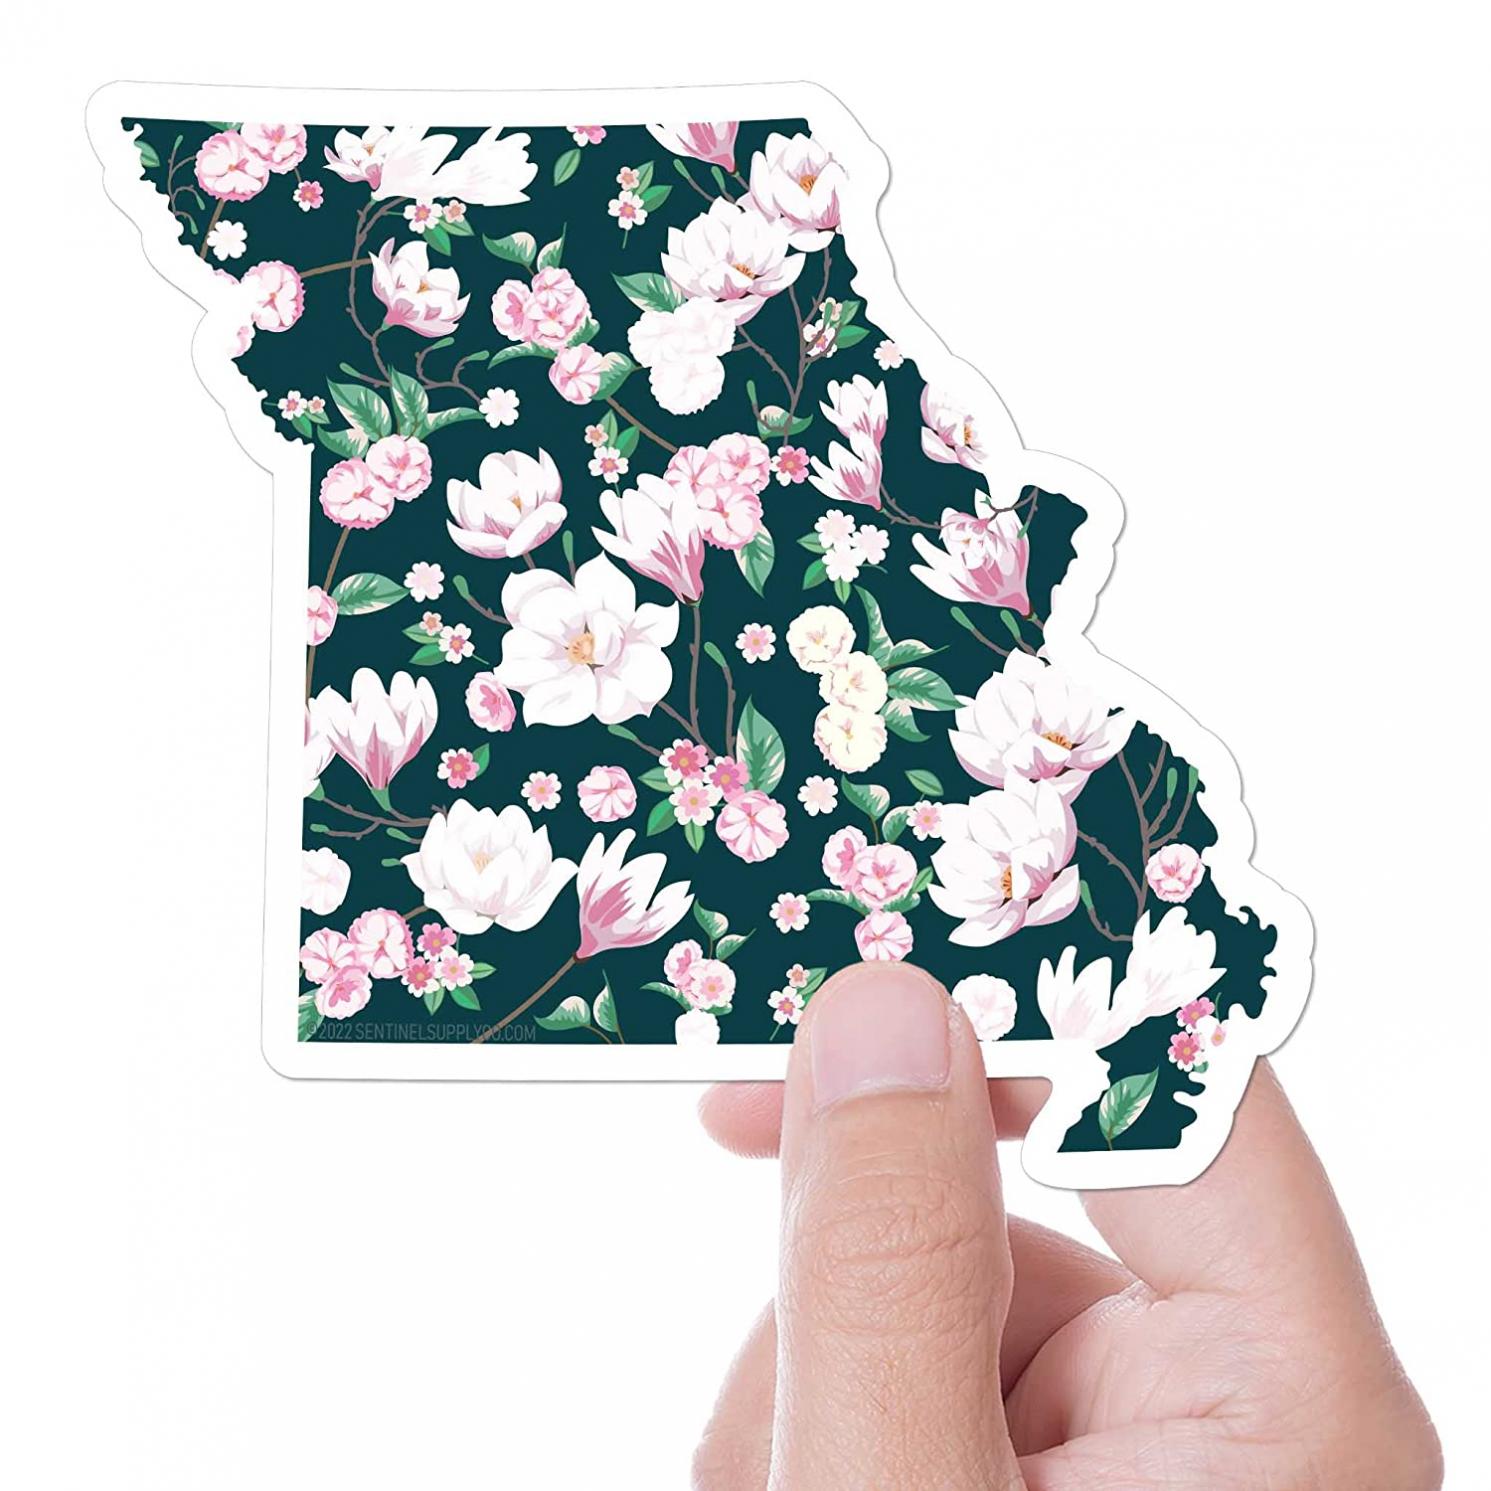 Pink Magnolia Missouri Bumper Sticker for Car, Cute Southern Stickers for Hydroflask, Kansas City & St Louis Laptop Decal for Tumbler (Small - 3.75" Water Bottle Size)